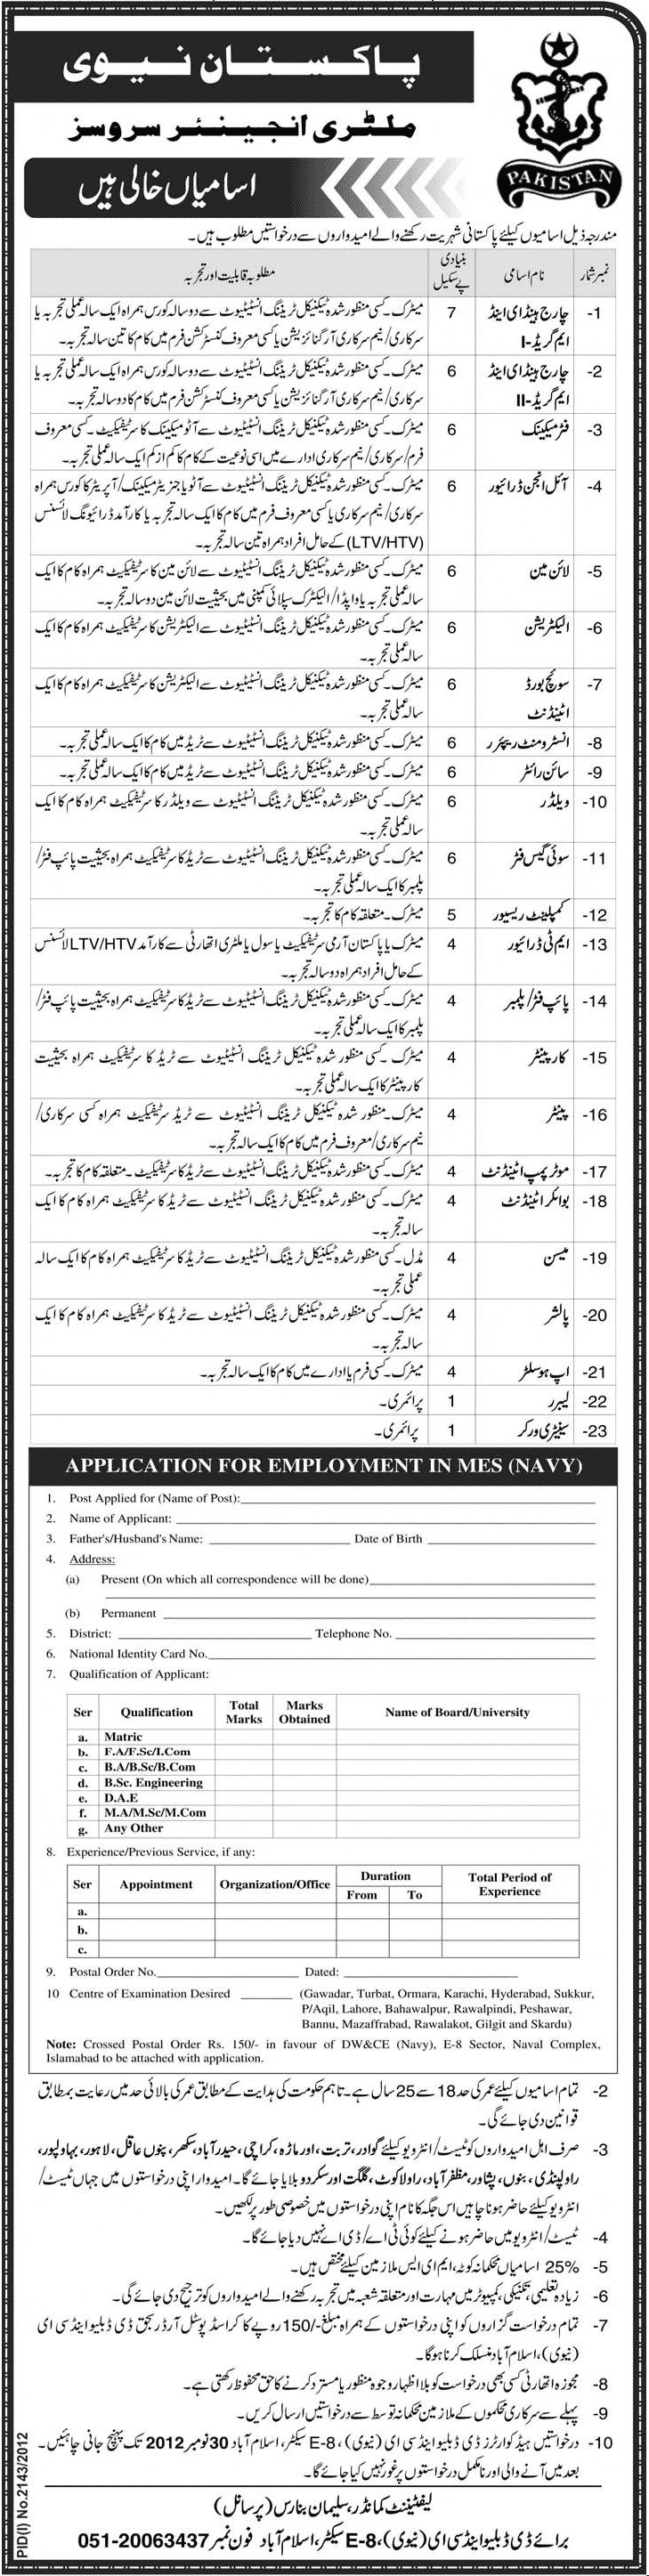 Jobs in MES Pakistan Navy Military Engineer Services 2012